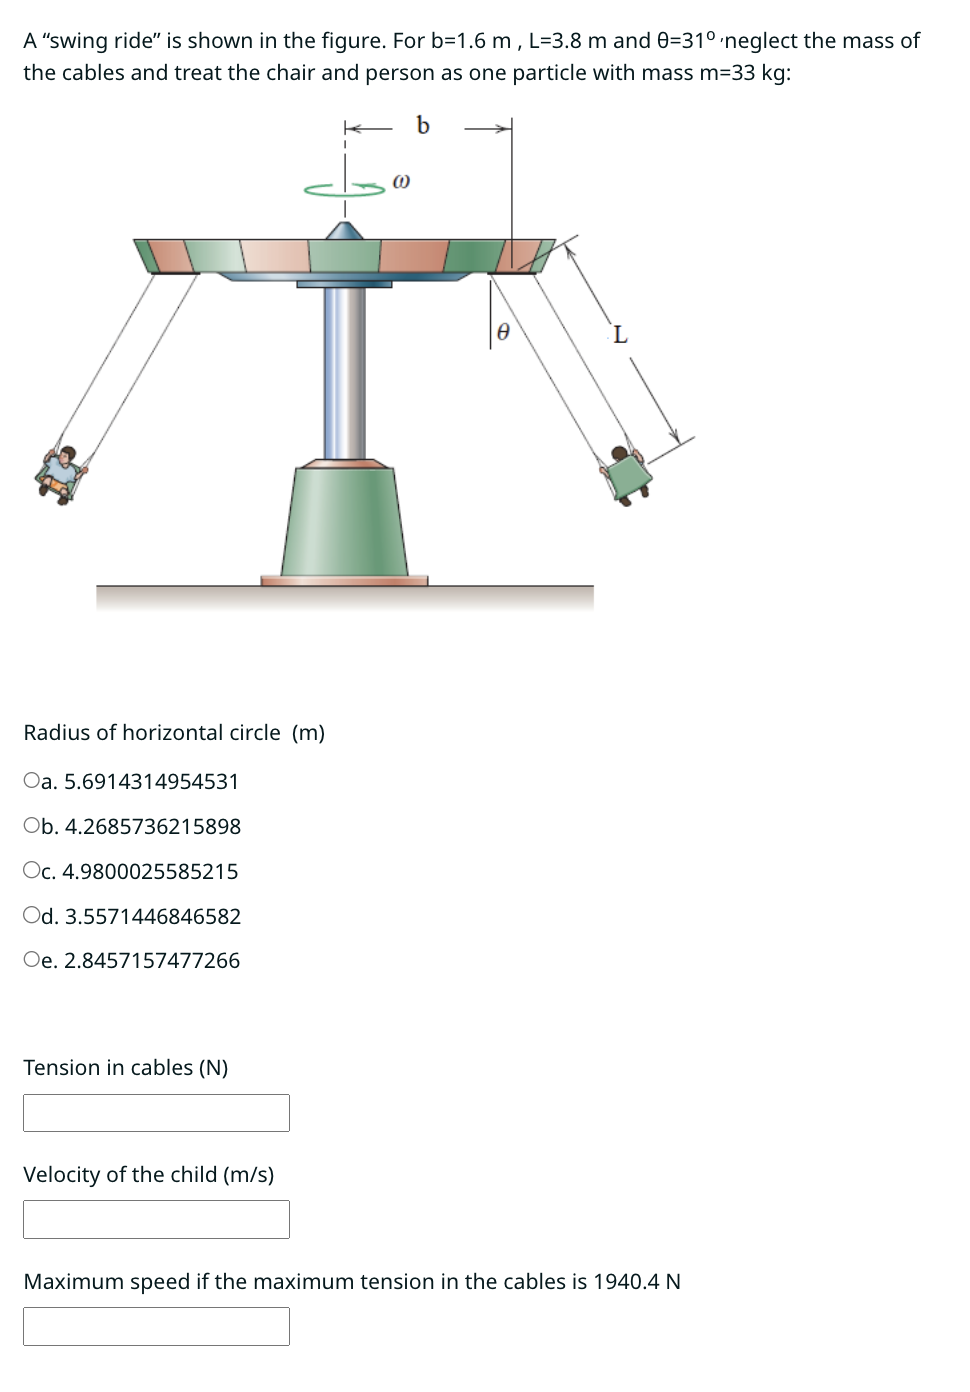 A "swing ride" is shown in the figure. For b=1.6 m, L=3.8 m and 0=31° neglect the mass of
the cables and treat the chair and person as one particle with mass m=33 kg:
K b
Radius of horizontal circle (m)
Oa. 5.6914314954531
Ob. 4.2685736215898
Oc. 4.9800025585215
Od. 3.5571446846582
Oe. 2.8457157477266
Tension in cables (N)
Velocity of the child (m/s)
(0)
L
Maximum speed if the maximum tension in the cables is 1940.4 N